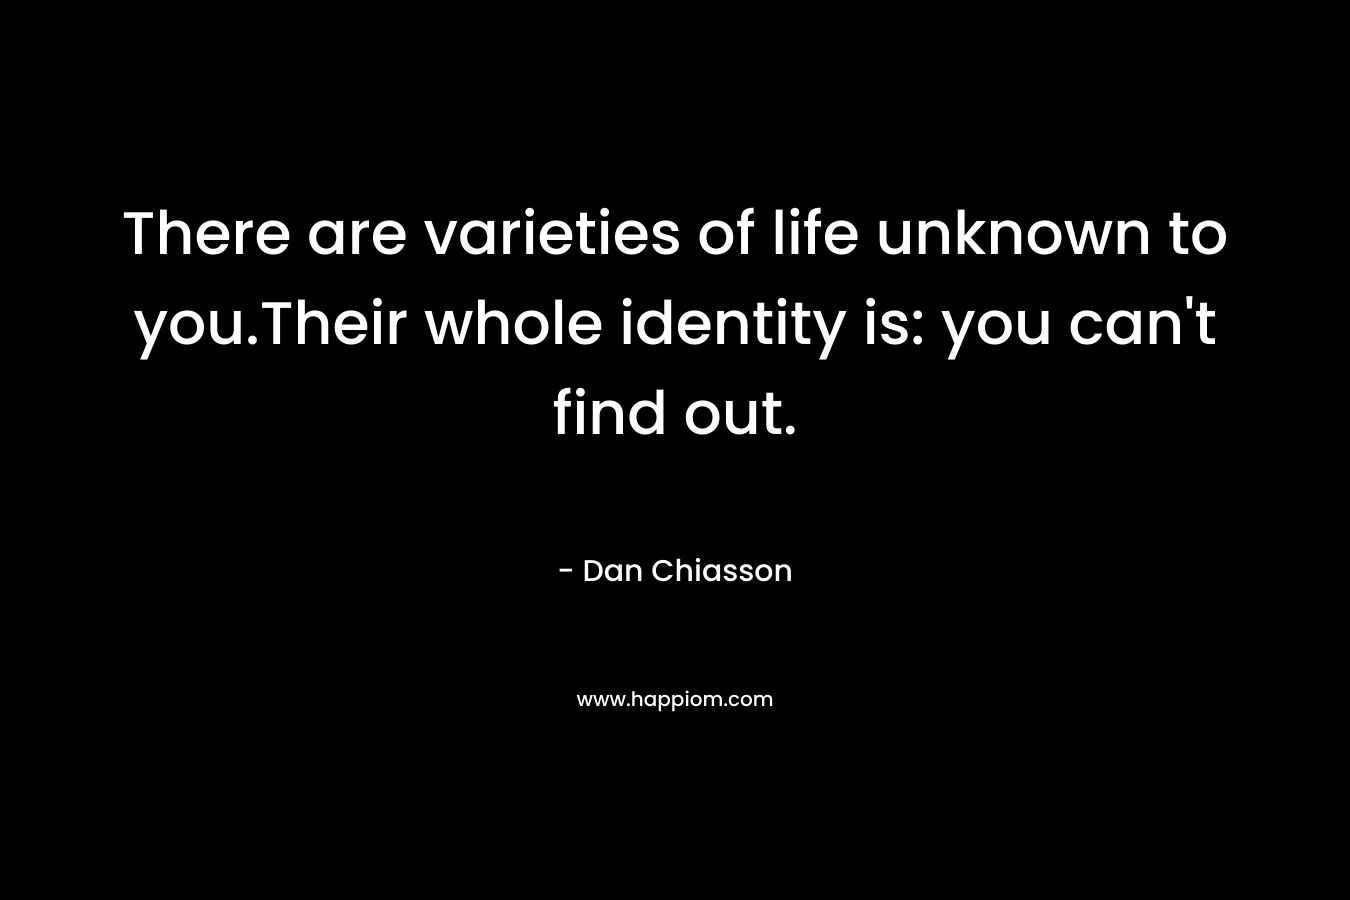 There are varieties of life unknown to you.Their whole identity is: you can't find out.